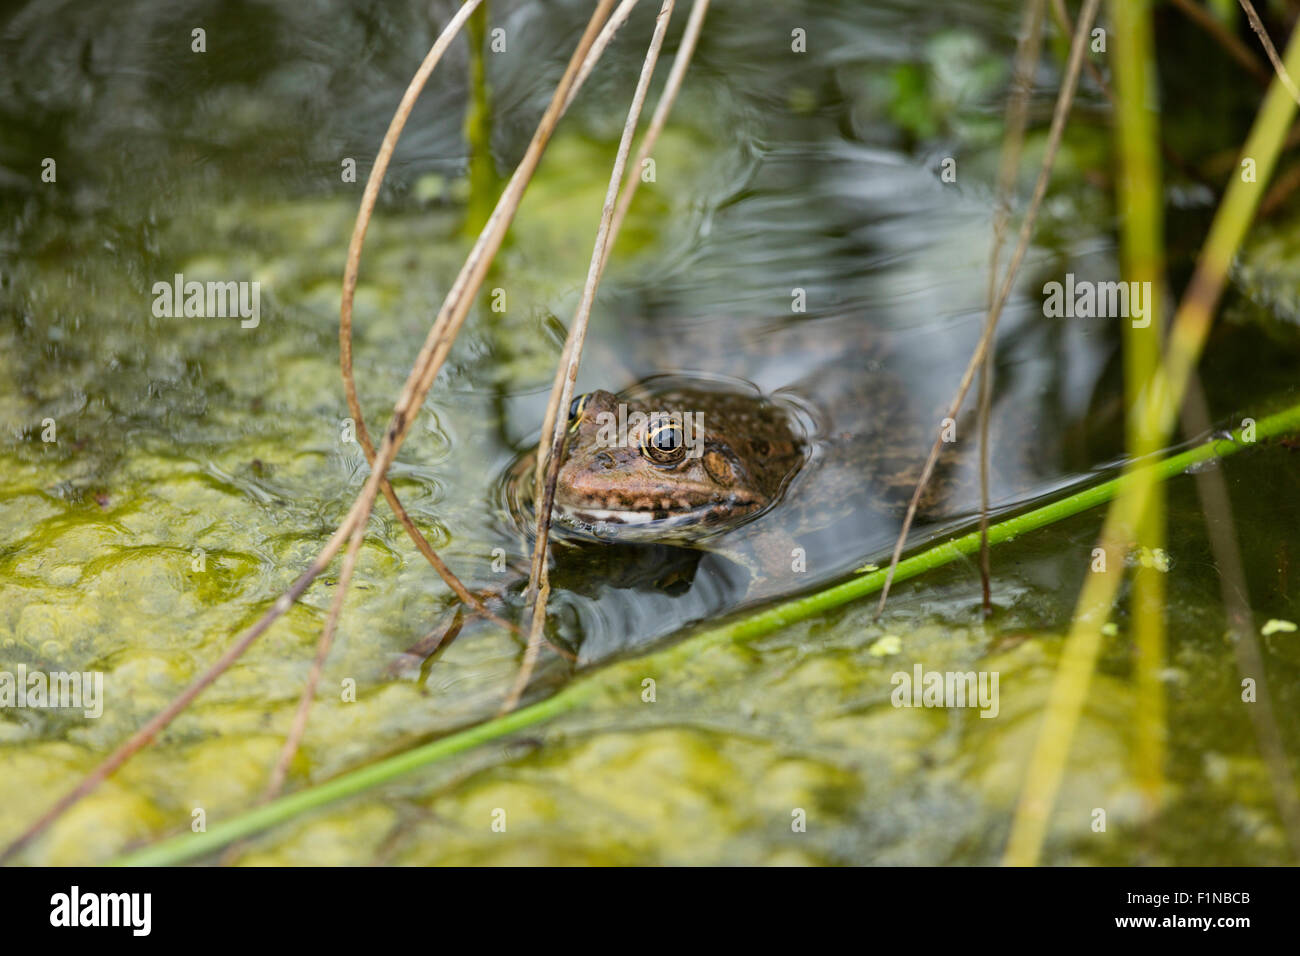 Marsh frog with its head popping out of the water amid weed and reeds Stock Photo